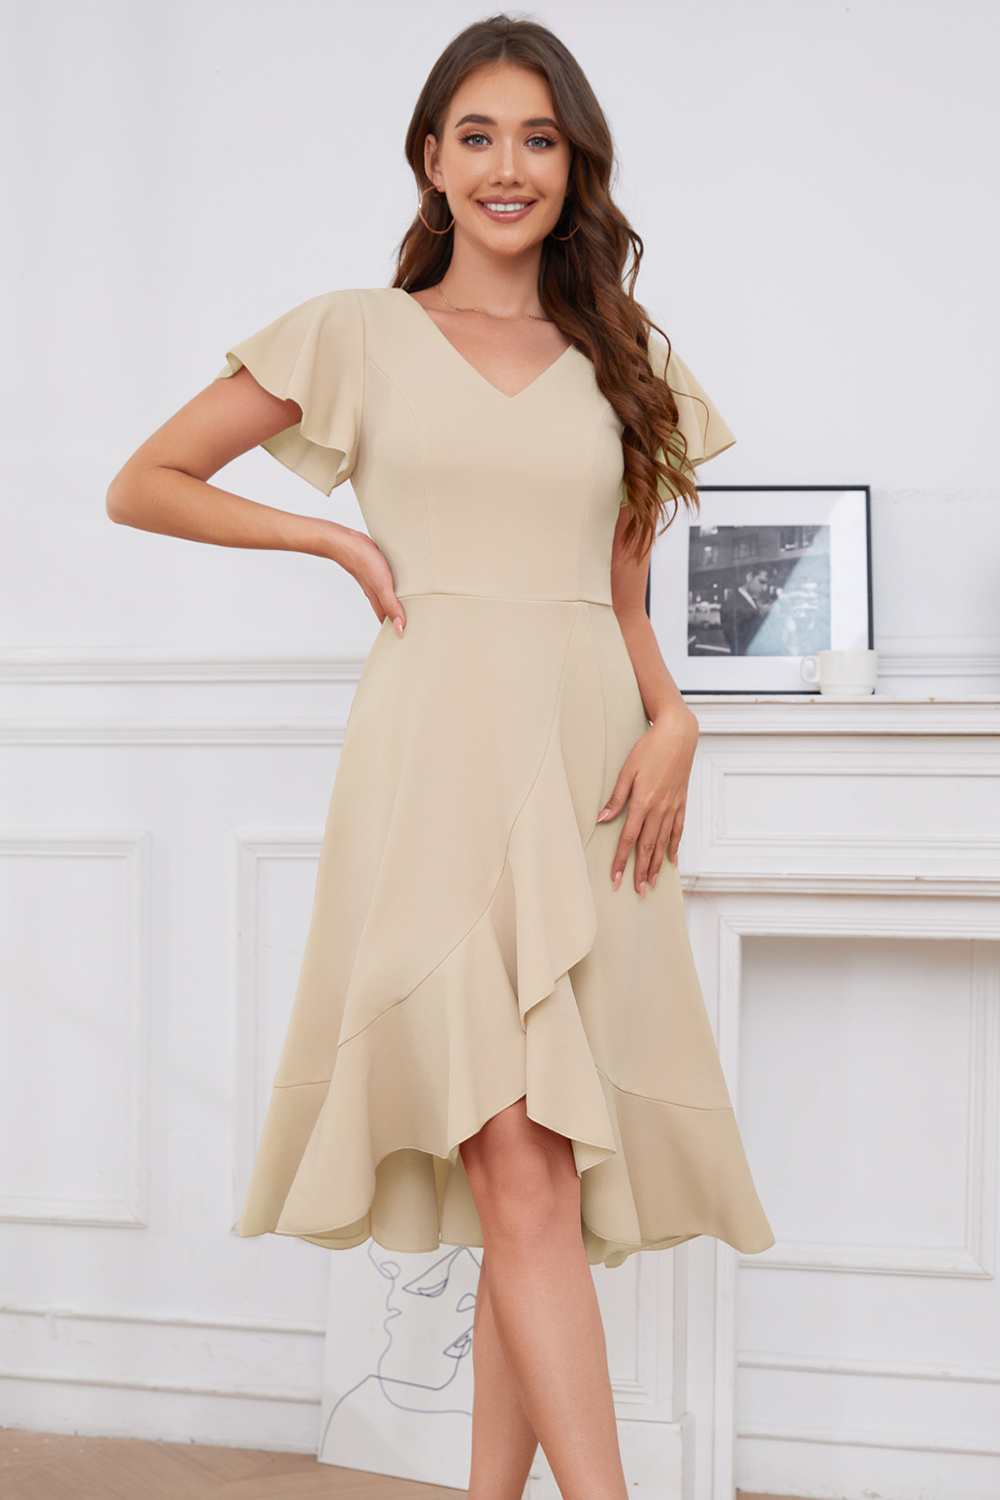 Elegant Ruffle V-Neck Formal Dress for Cocktail Tea Party, Wedding Guest, Bridesmaid